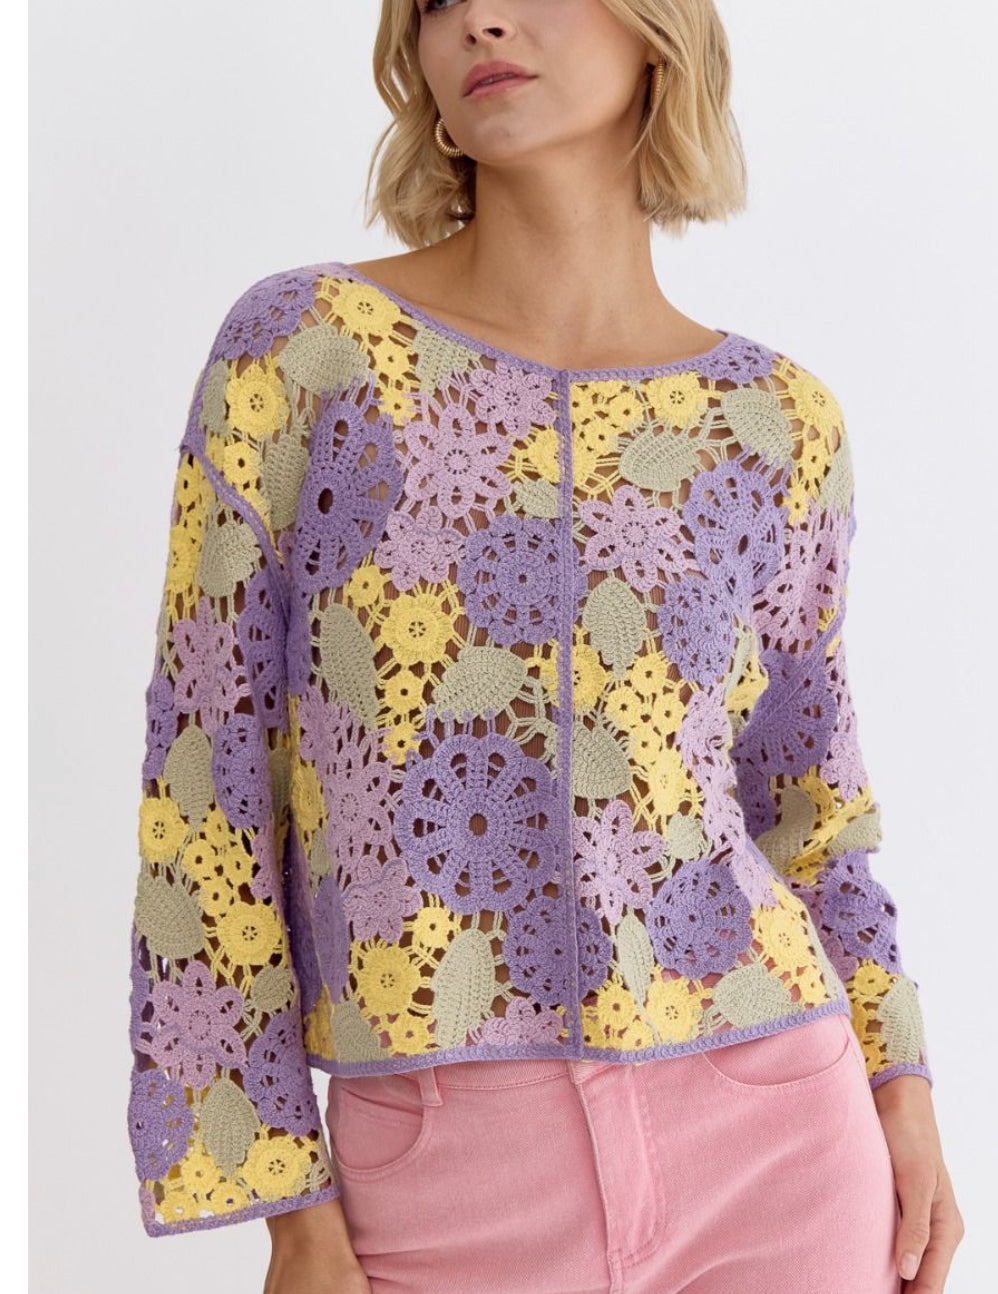 Lavendar/yellow crocheted floral sweater